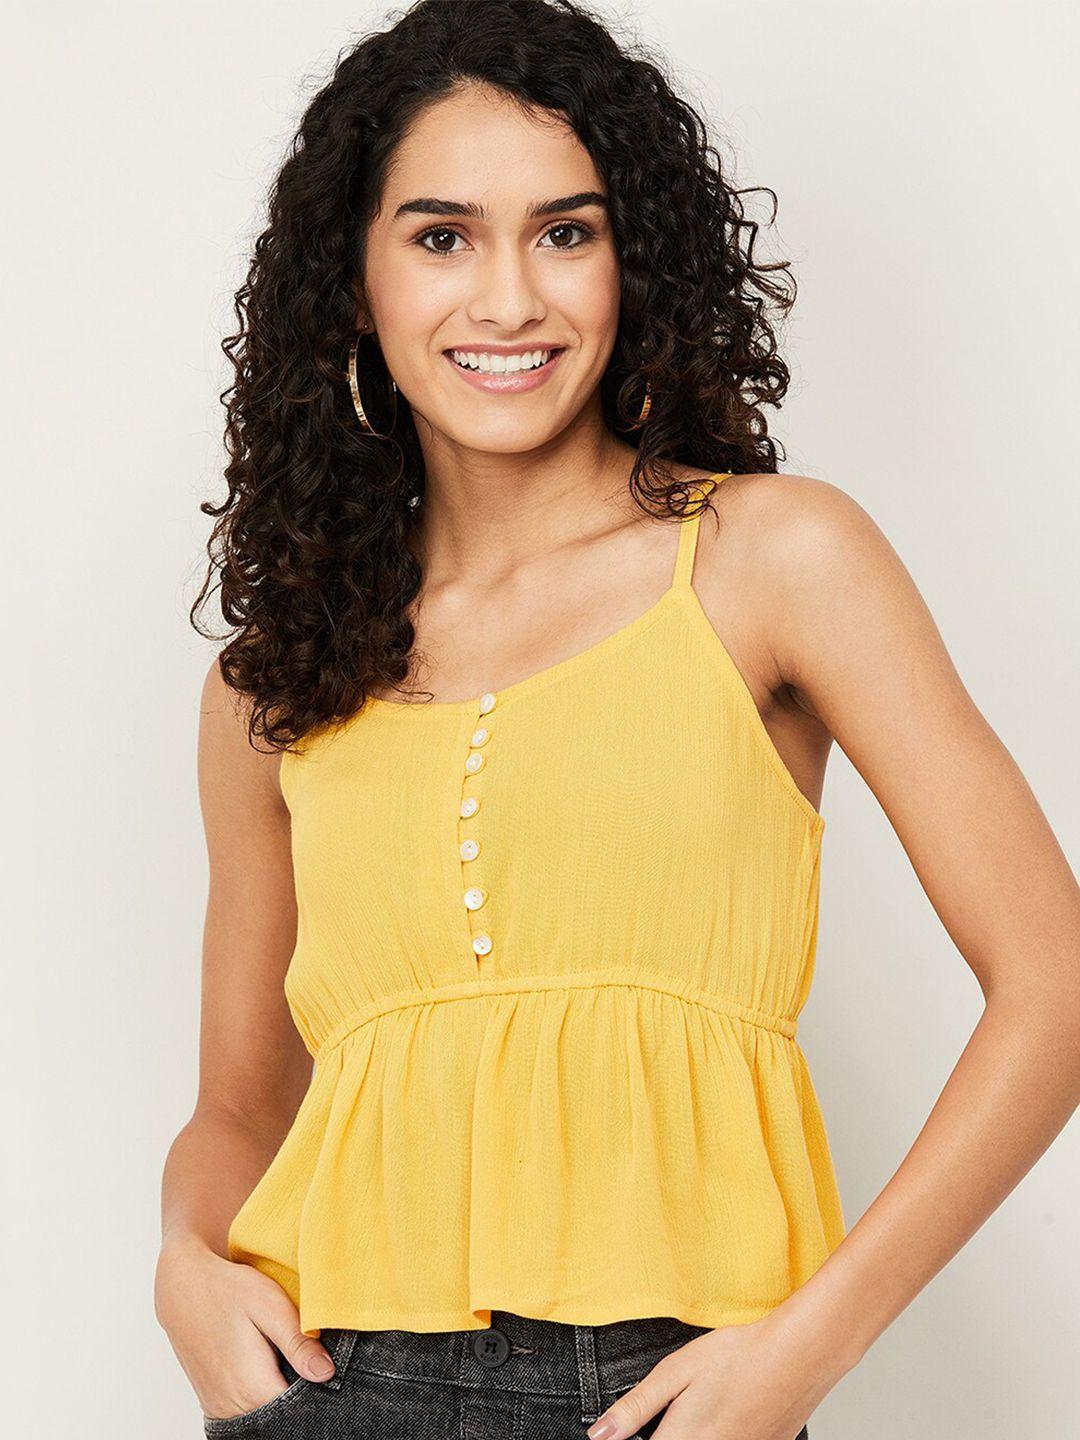 ginger-by-lifestyle-women--yellow-peplum-top